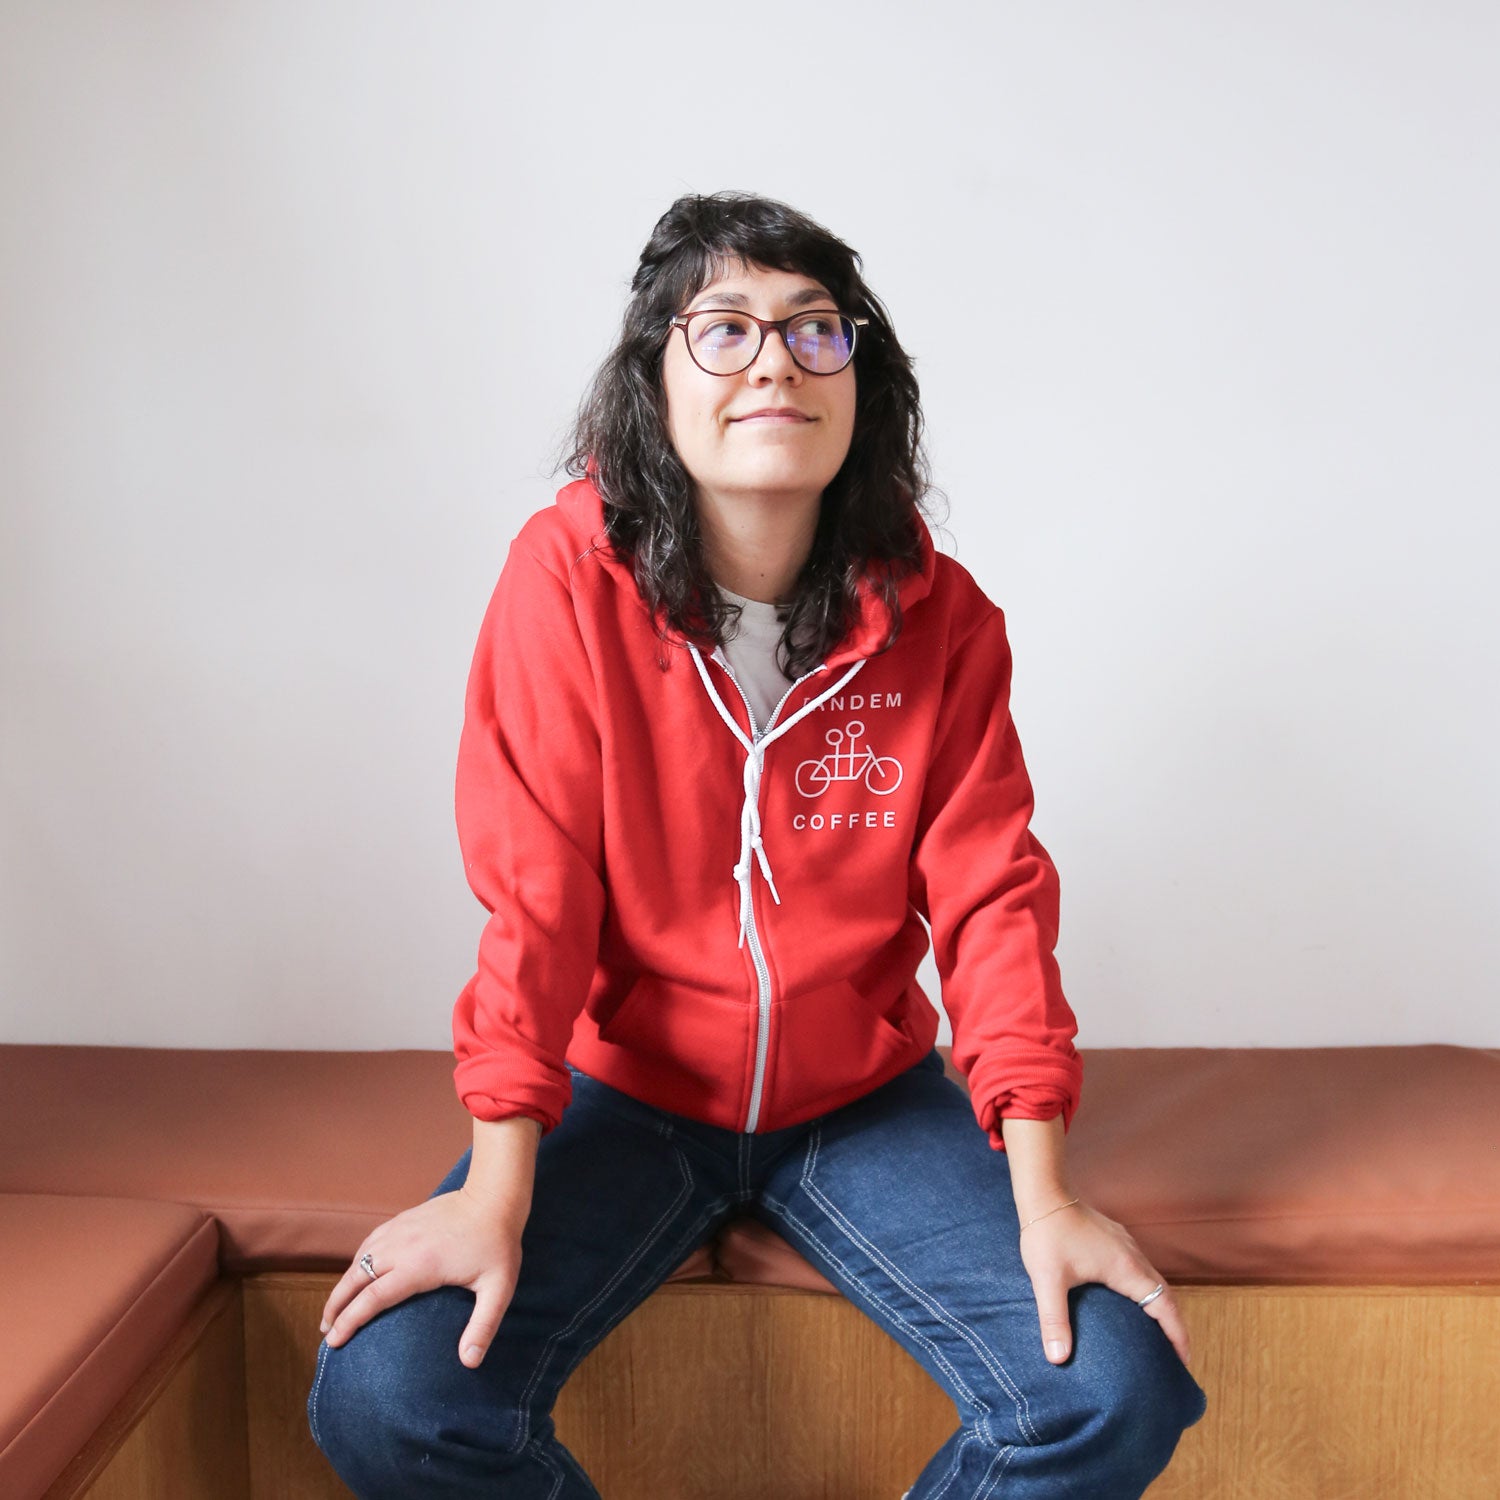 A young woman with glasses and curly hair, wearing a red Tandem Coffee Roasters zip-up hoodie, sits on a brown bench, looking upwards with a subtle smile.